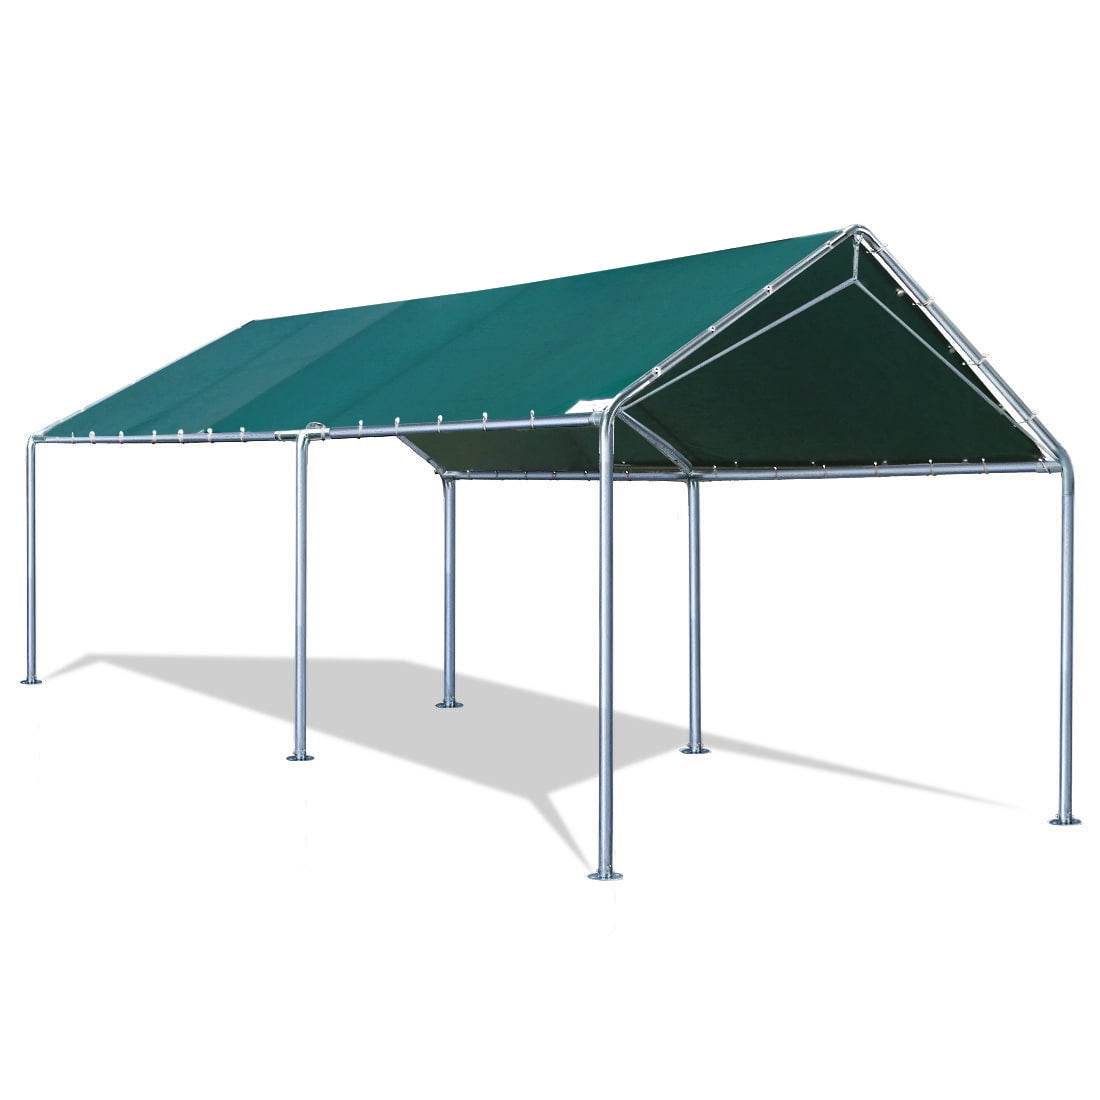 King Canopy Universal 6 Leg Canopy with Cover White Cover 10' x 13' 